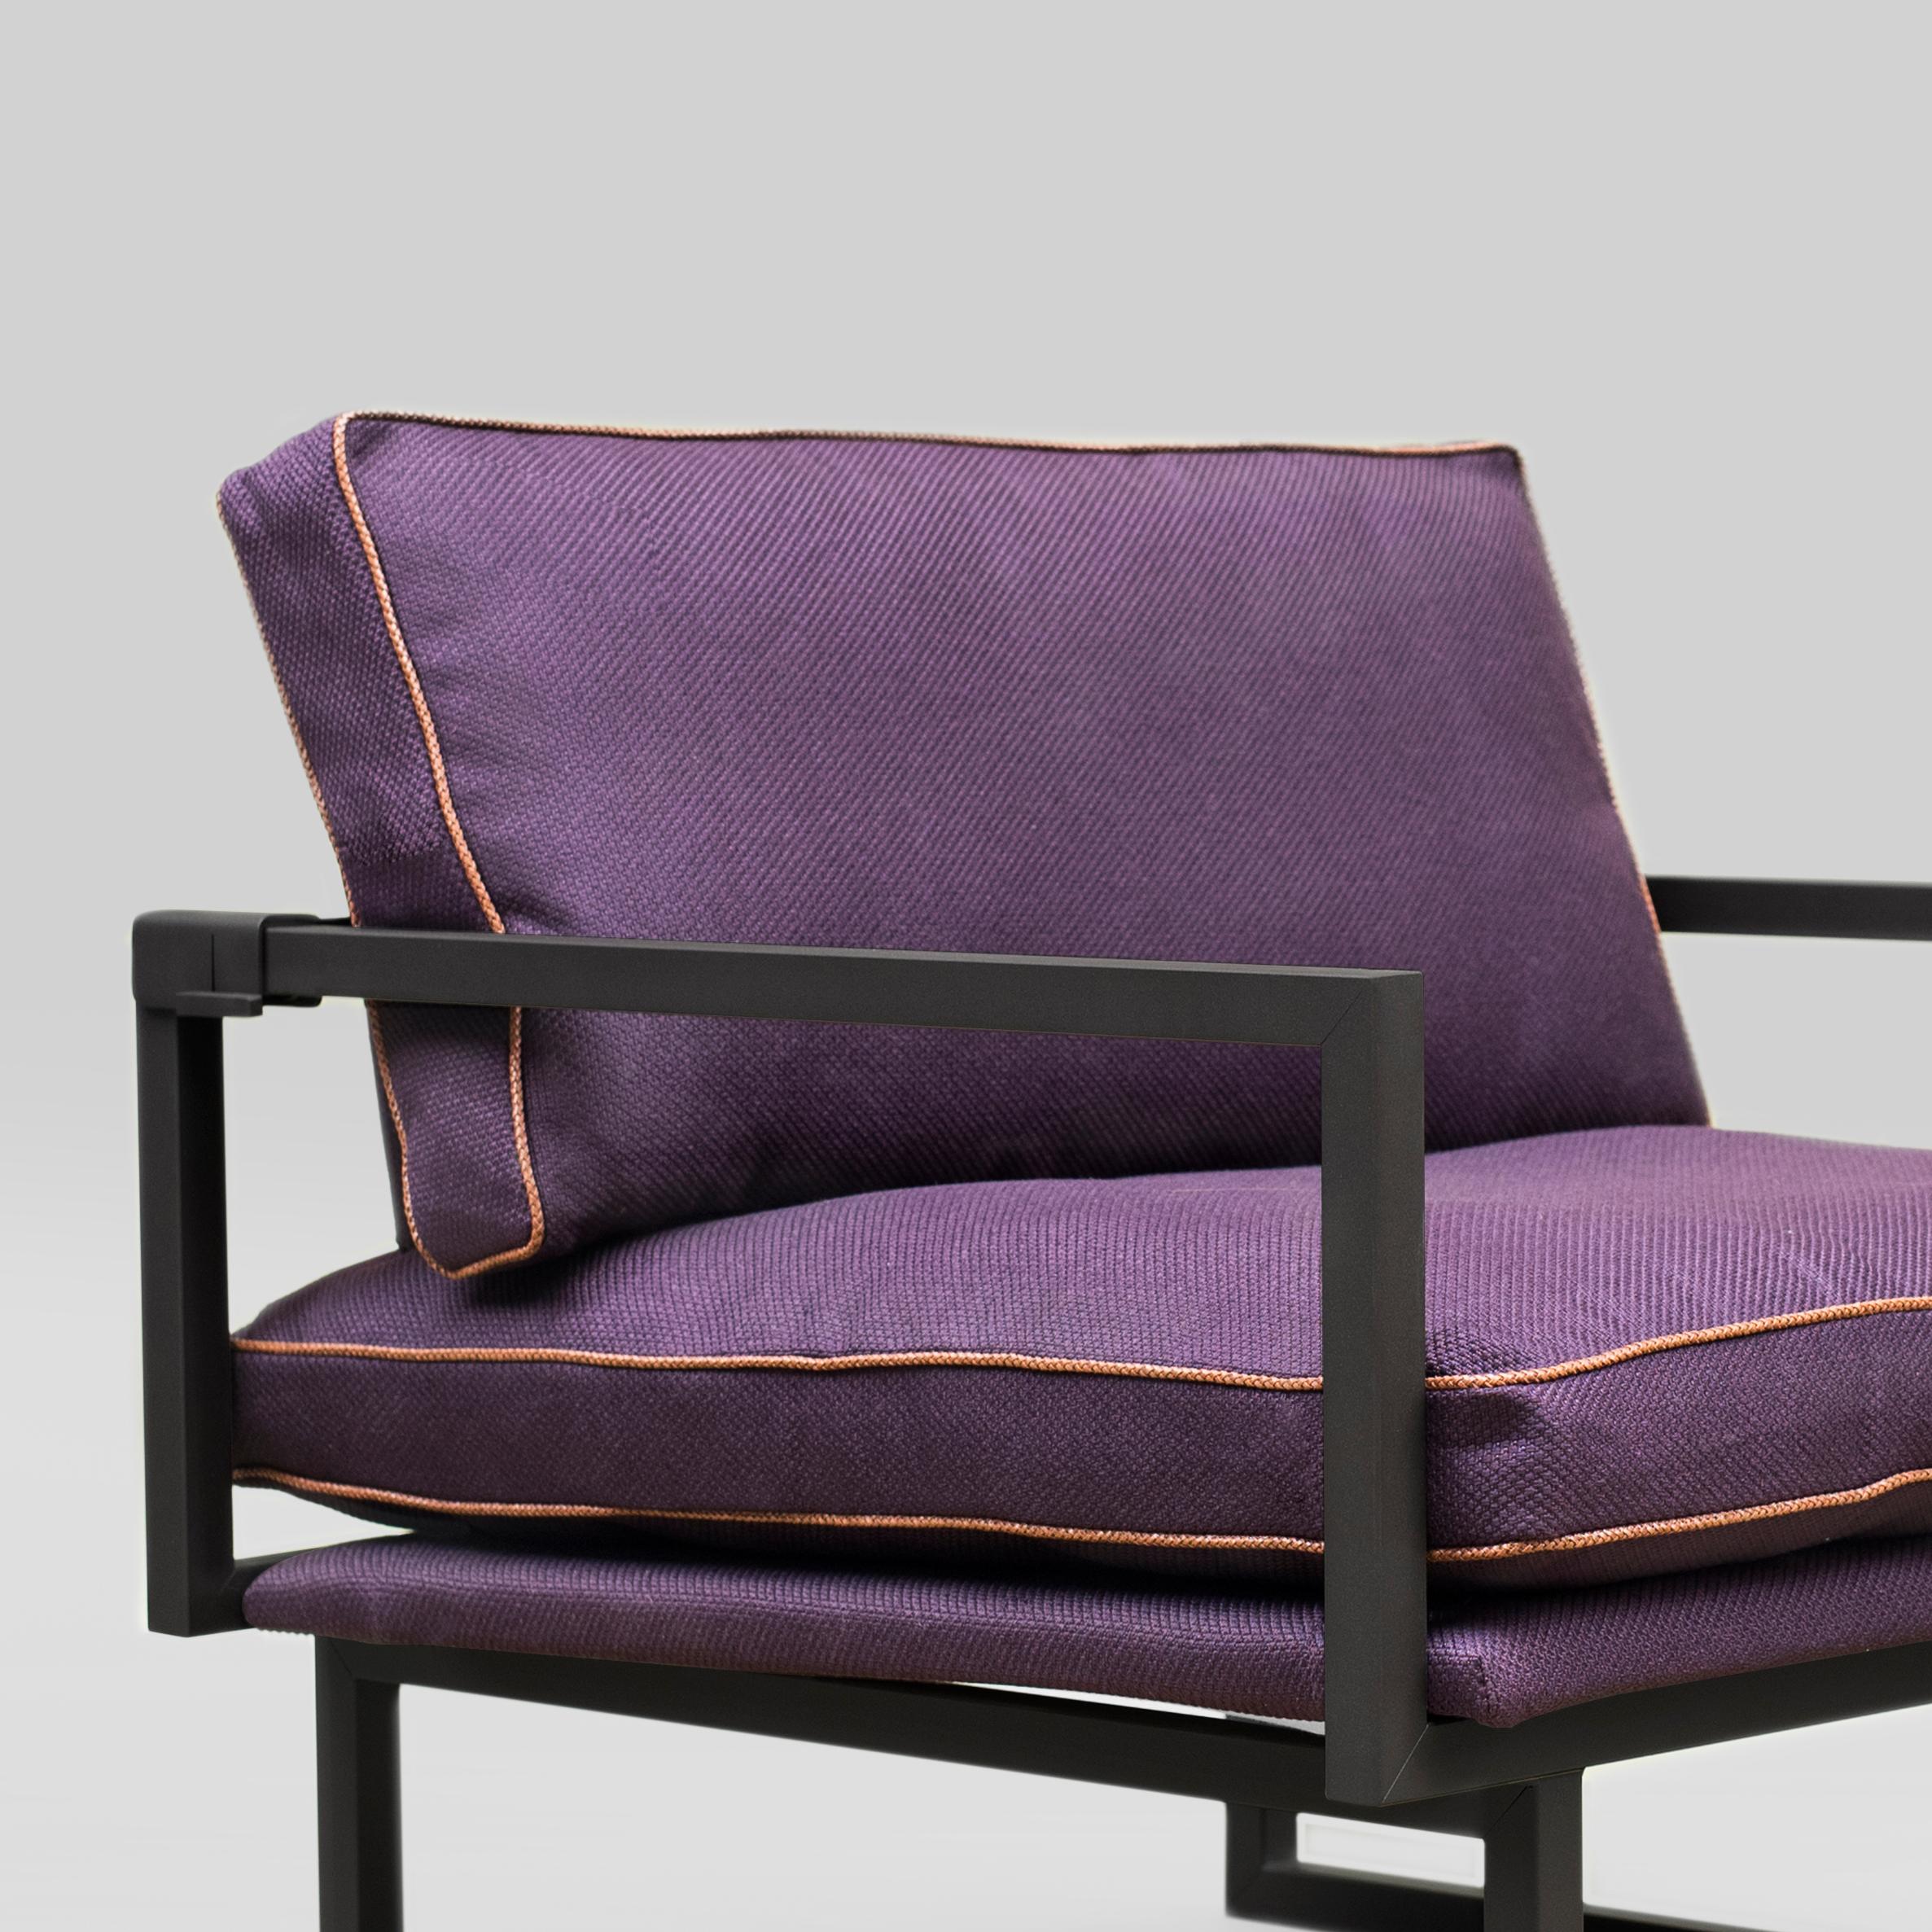 Armchair designed by Peter Ghyczy in 2009.
Manufactured by Ghyczy, (Netherlands)

This armchair has an airy and light weight architectural construction. The GP01 is designed with an adjustable backrest, which allows to adjust the seat